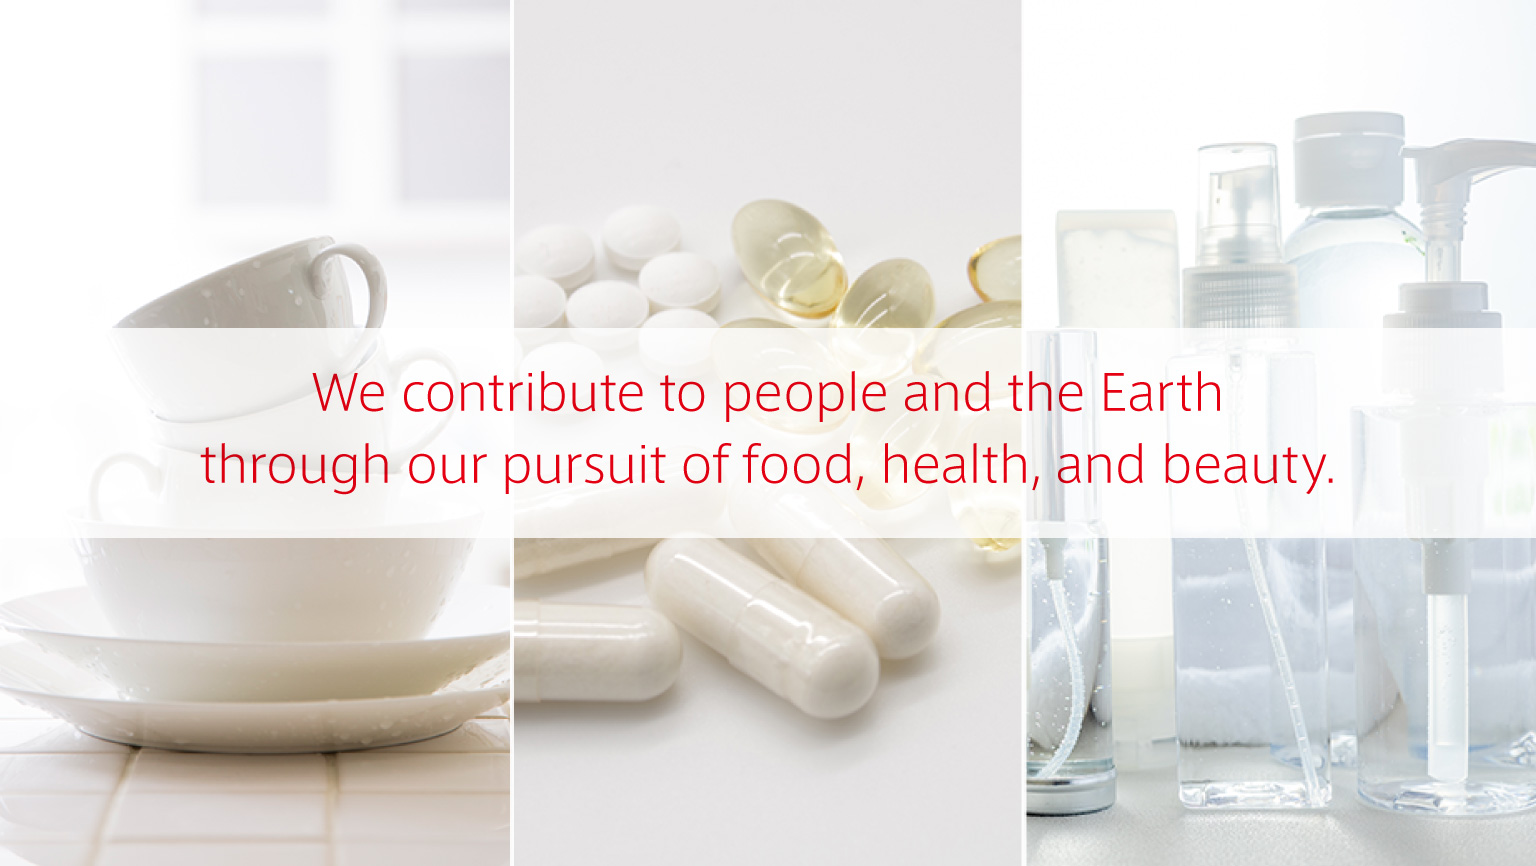 We contribute to people and the Earth through our pursuit of food, health, and beauty.